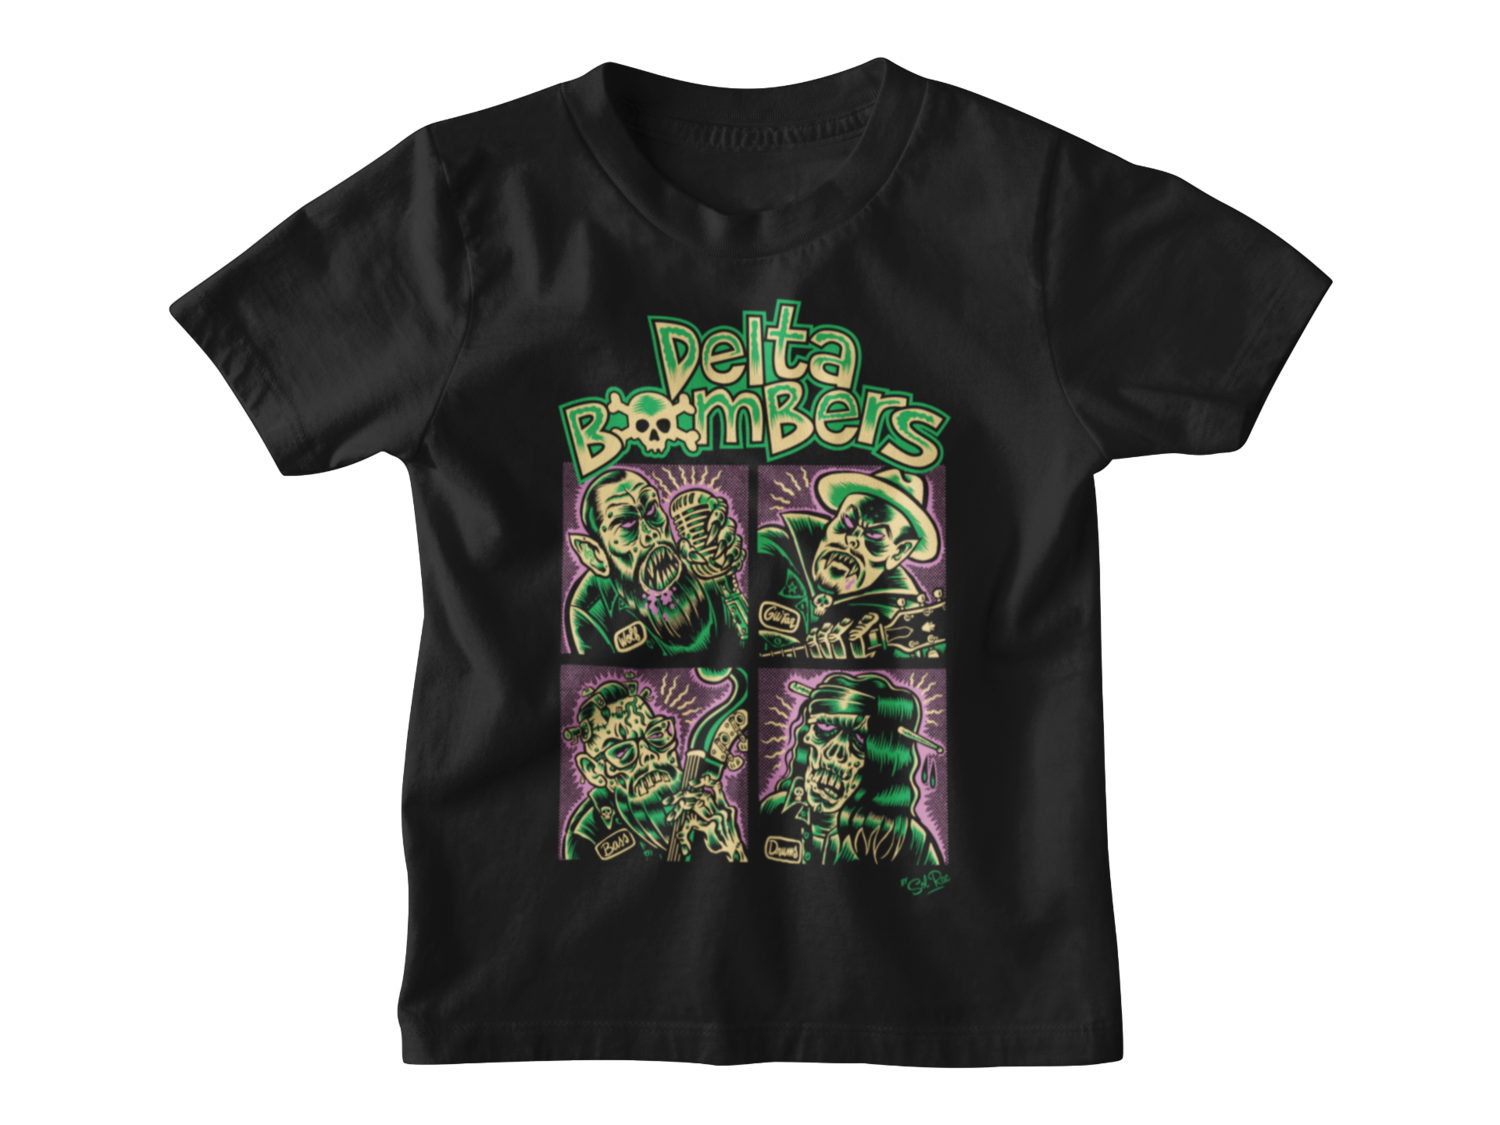 THE DELTA BOMBERS "Bomber Bunch" T-SHIRT KIDS